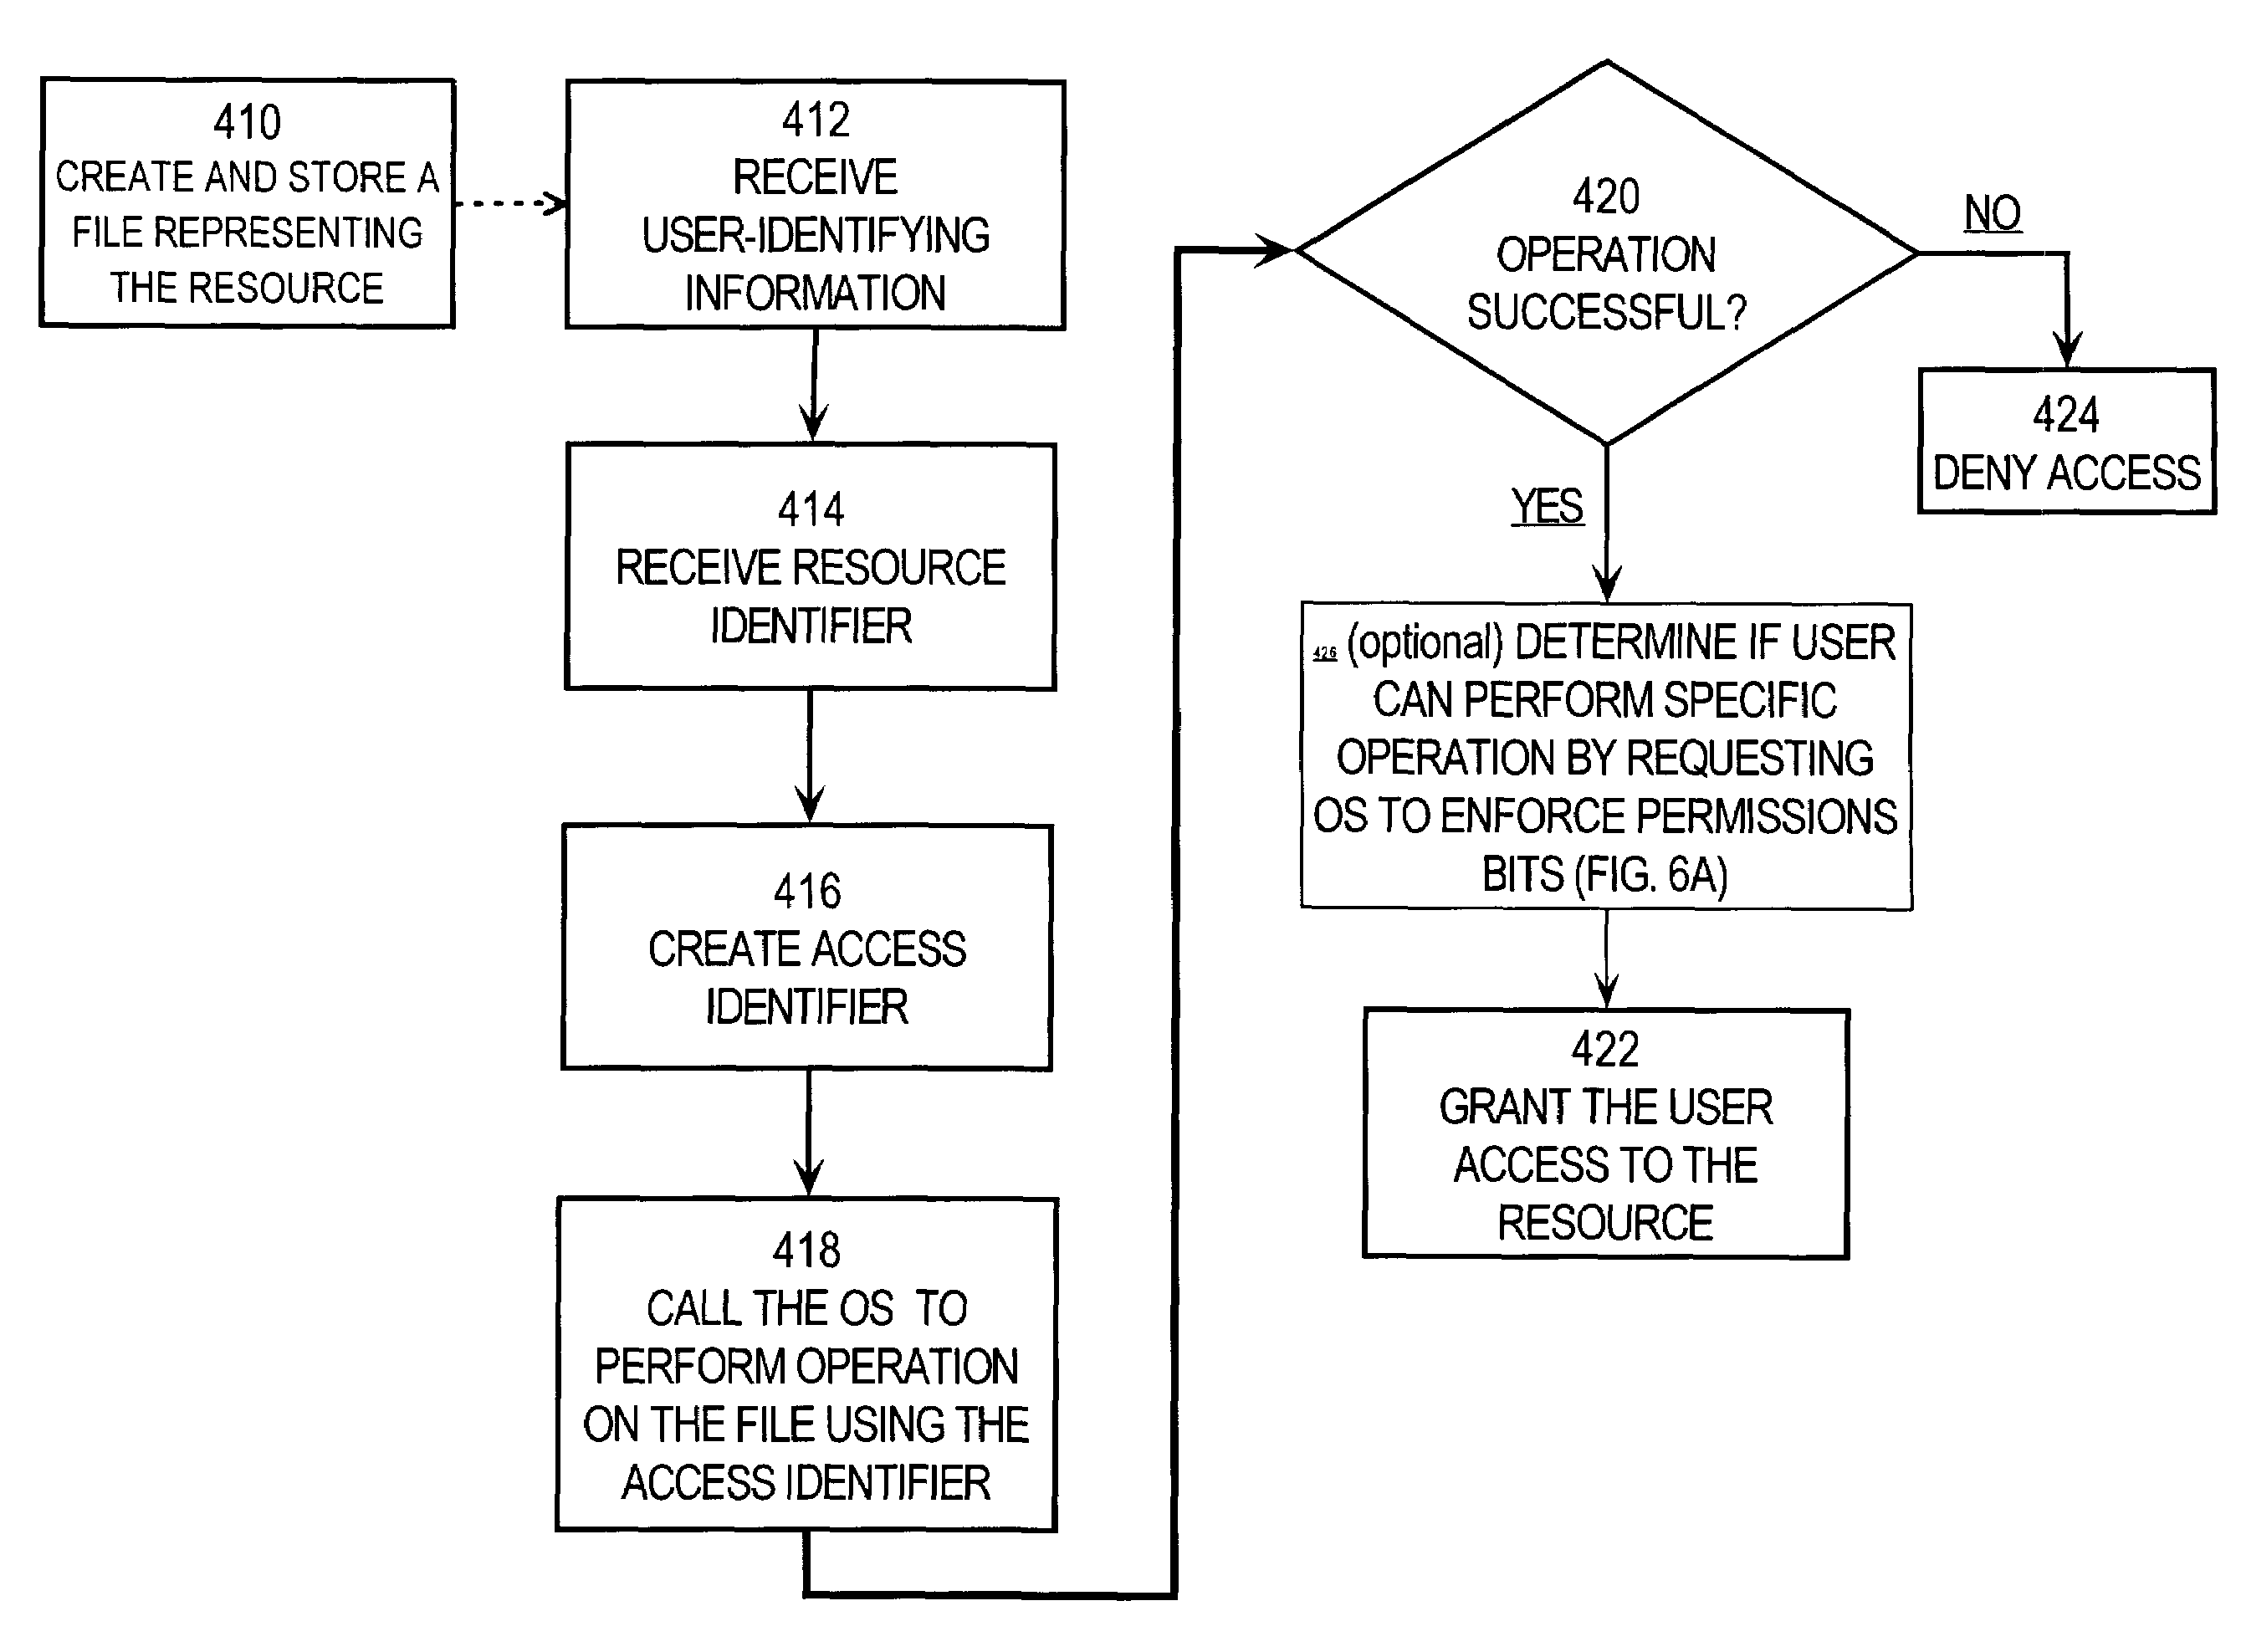 Role-based access control enforced by filesystem of an operating system